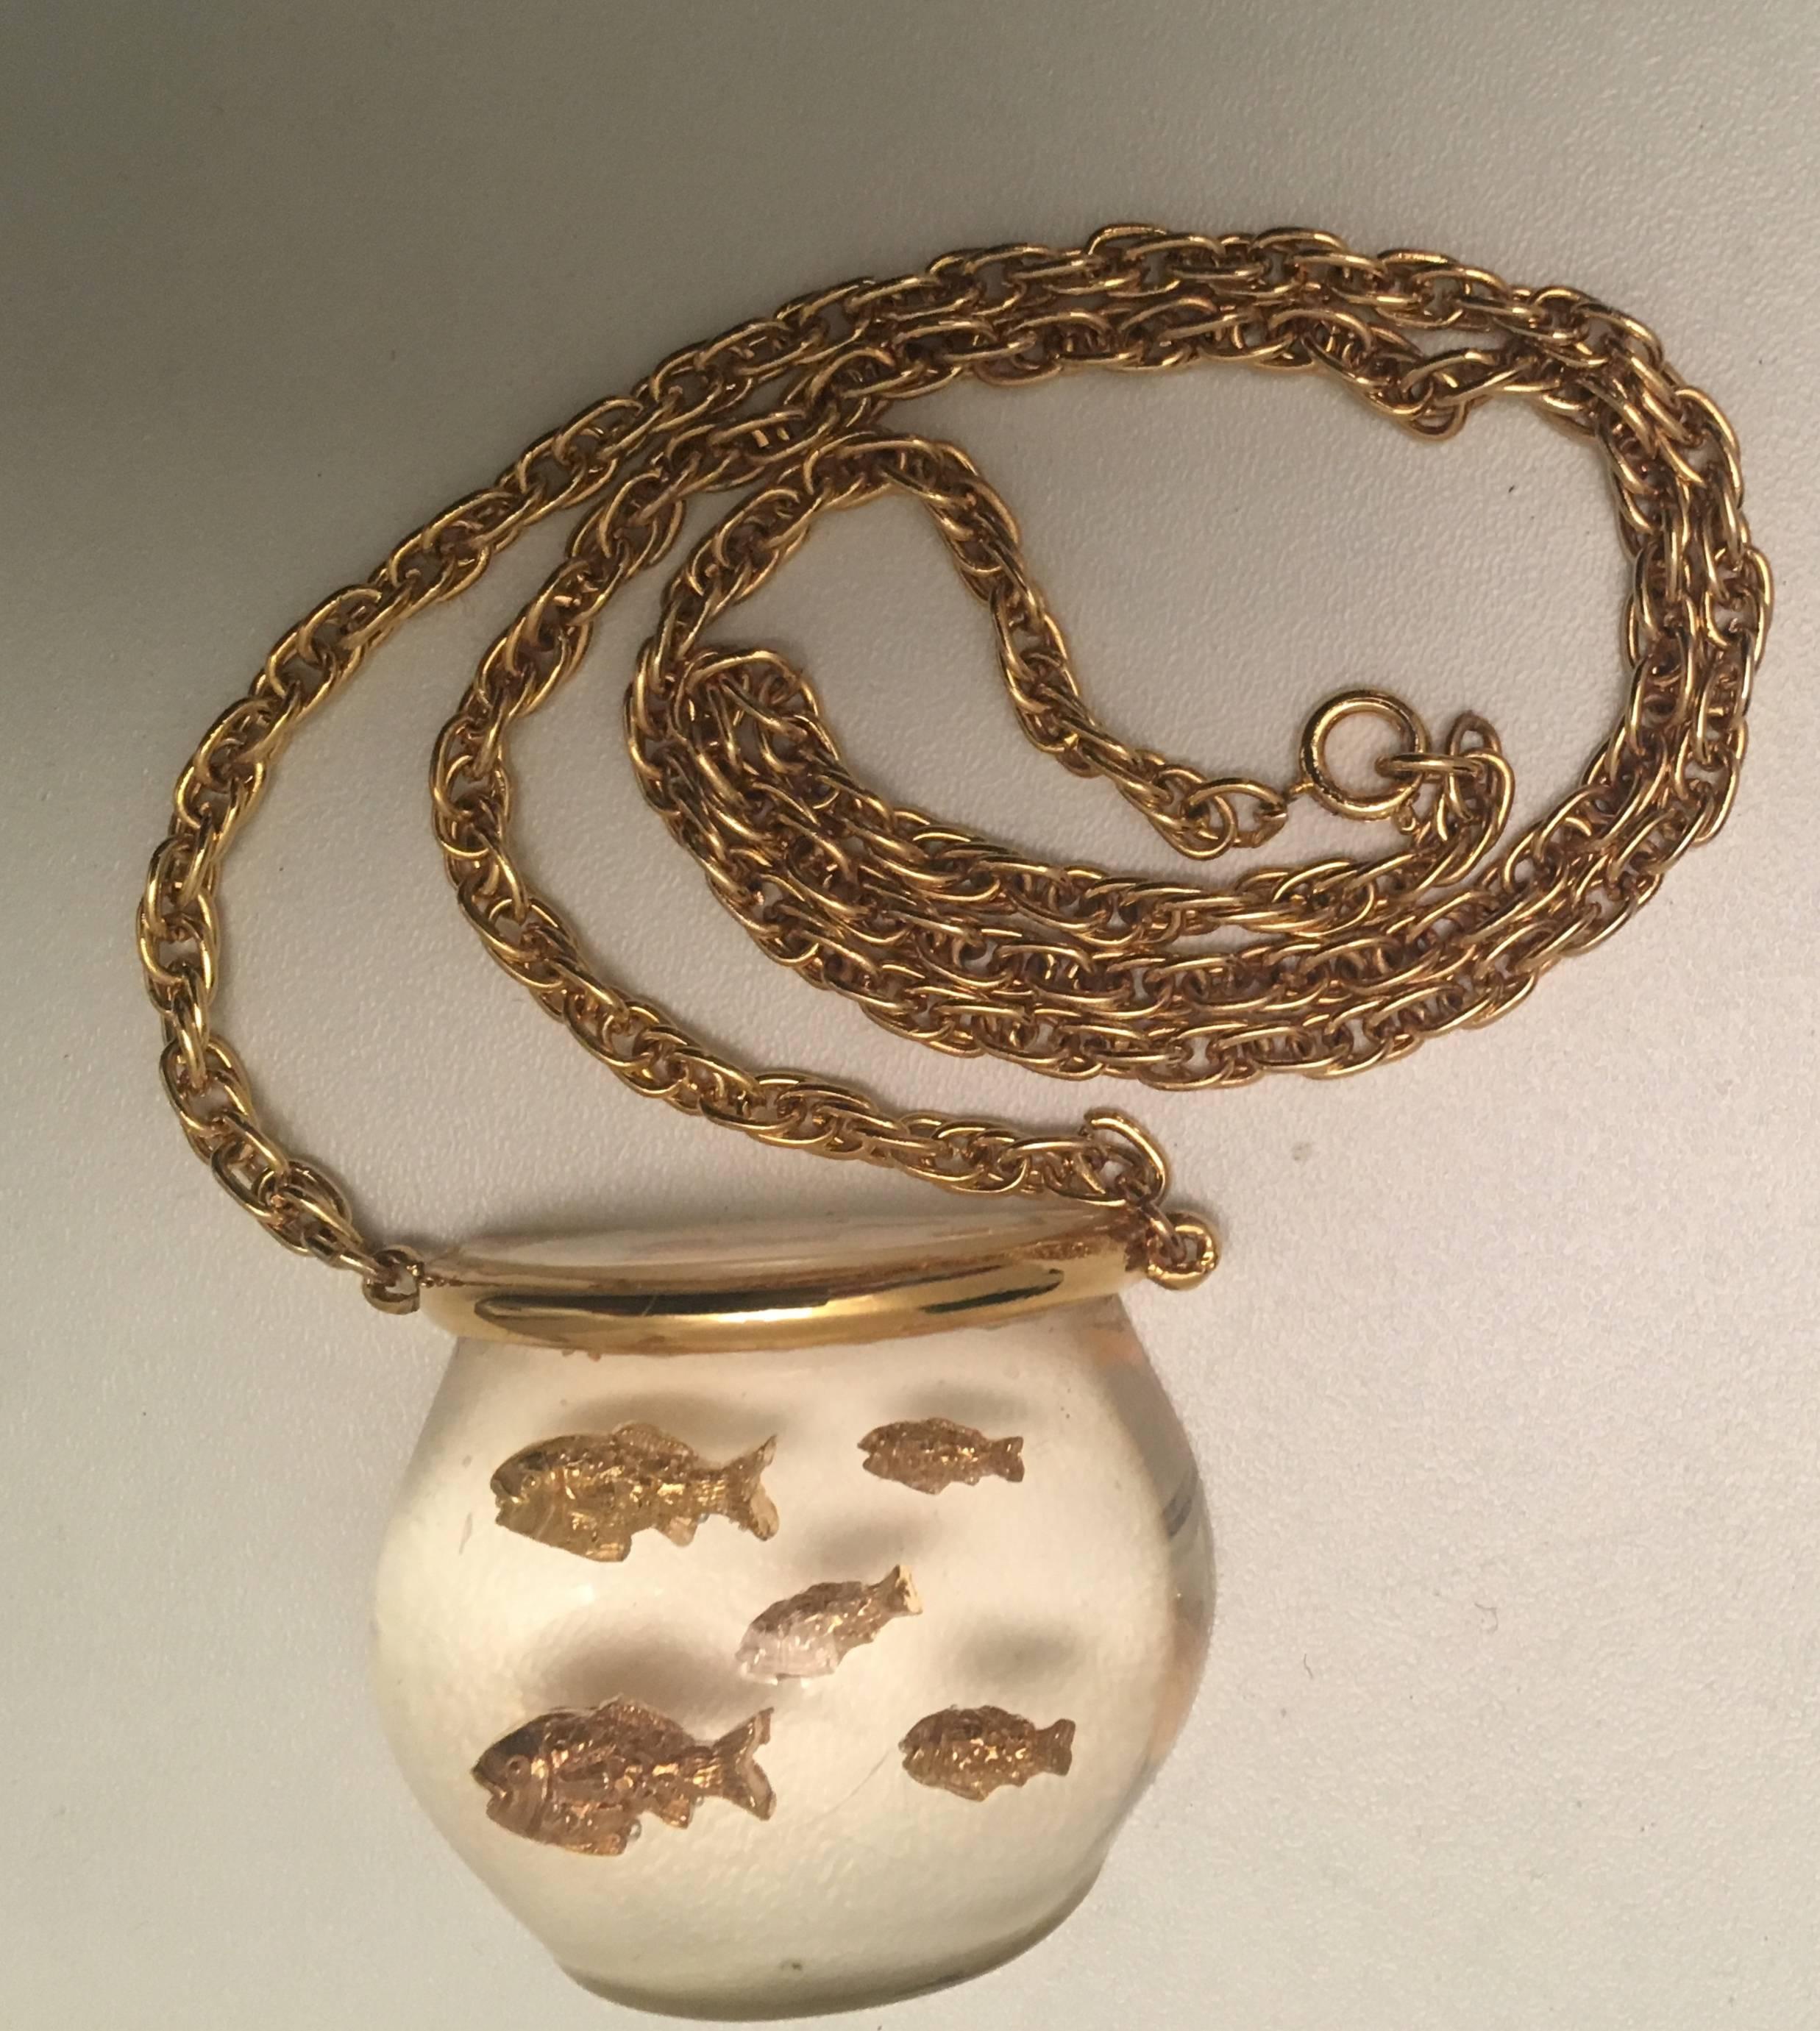 1970's Lucite Fish Bowl Necklace In Excellent Condition For Sale In Boca Raton, FL